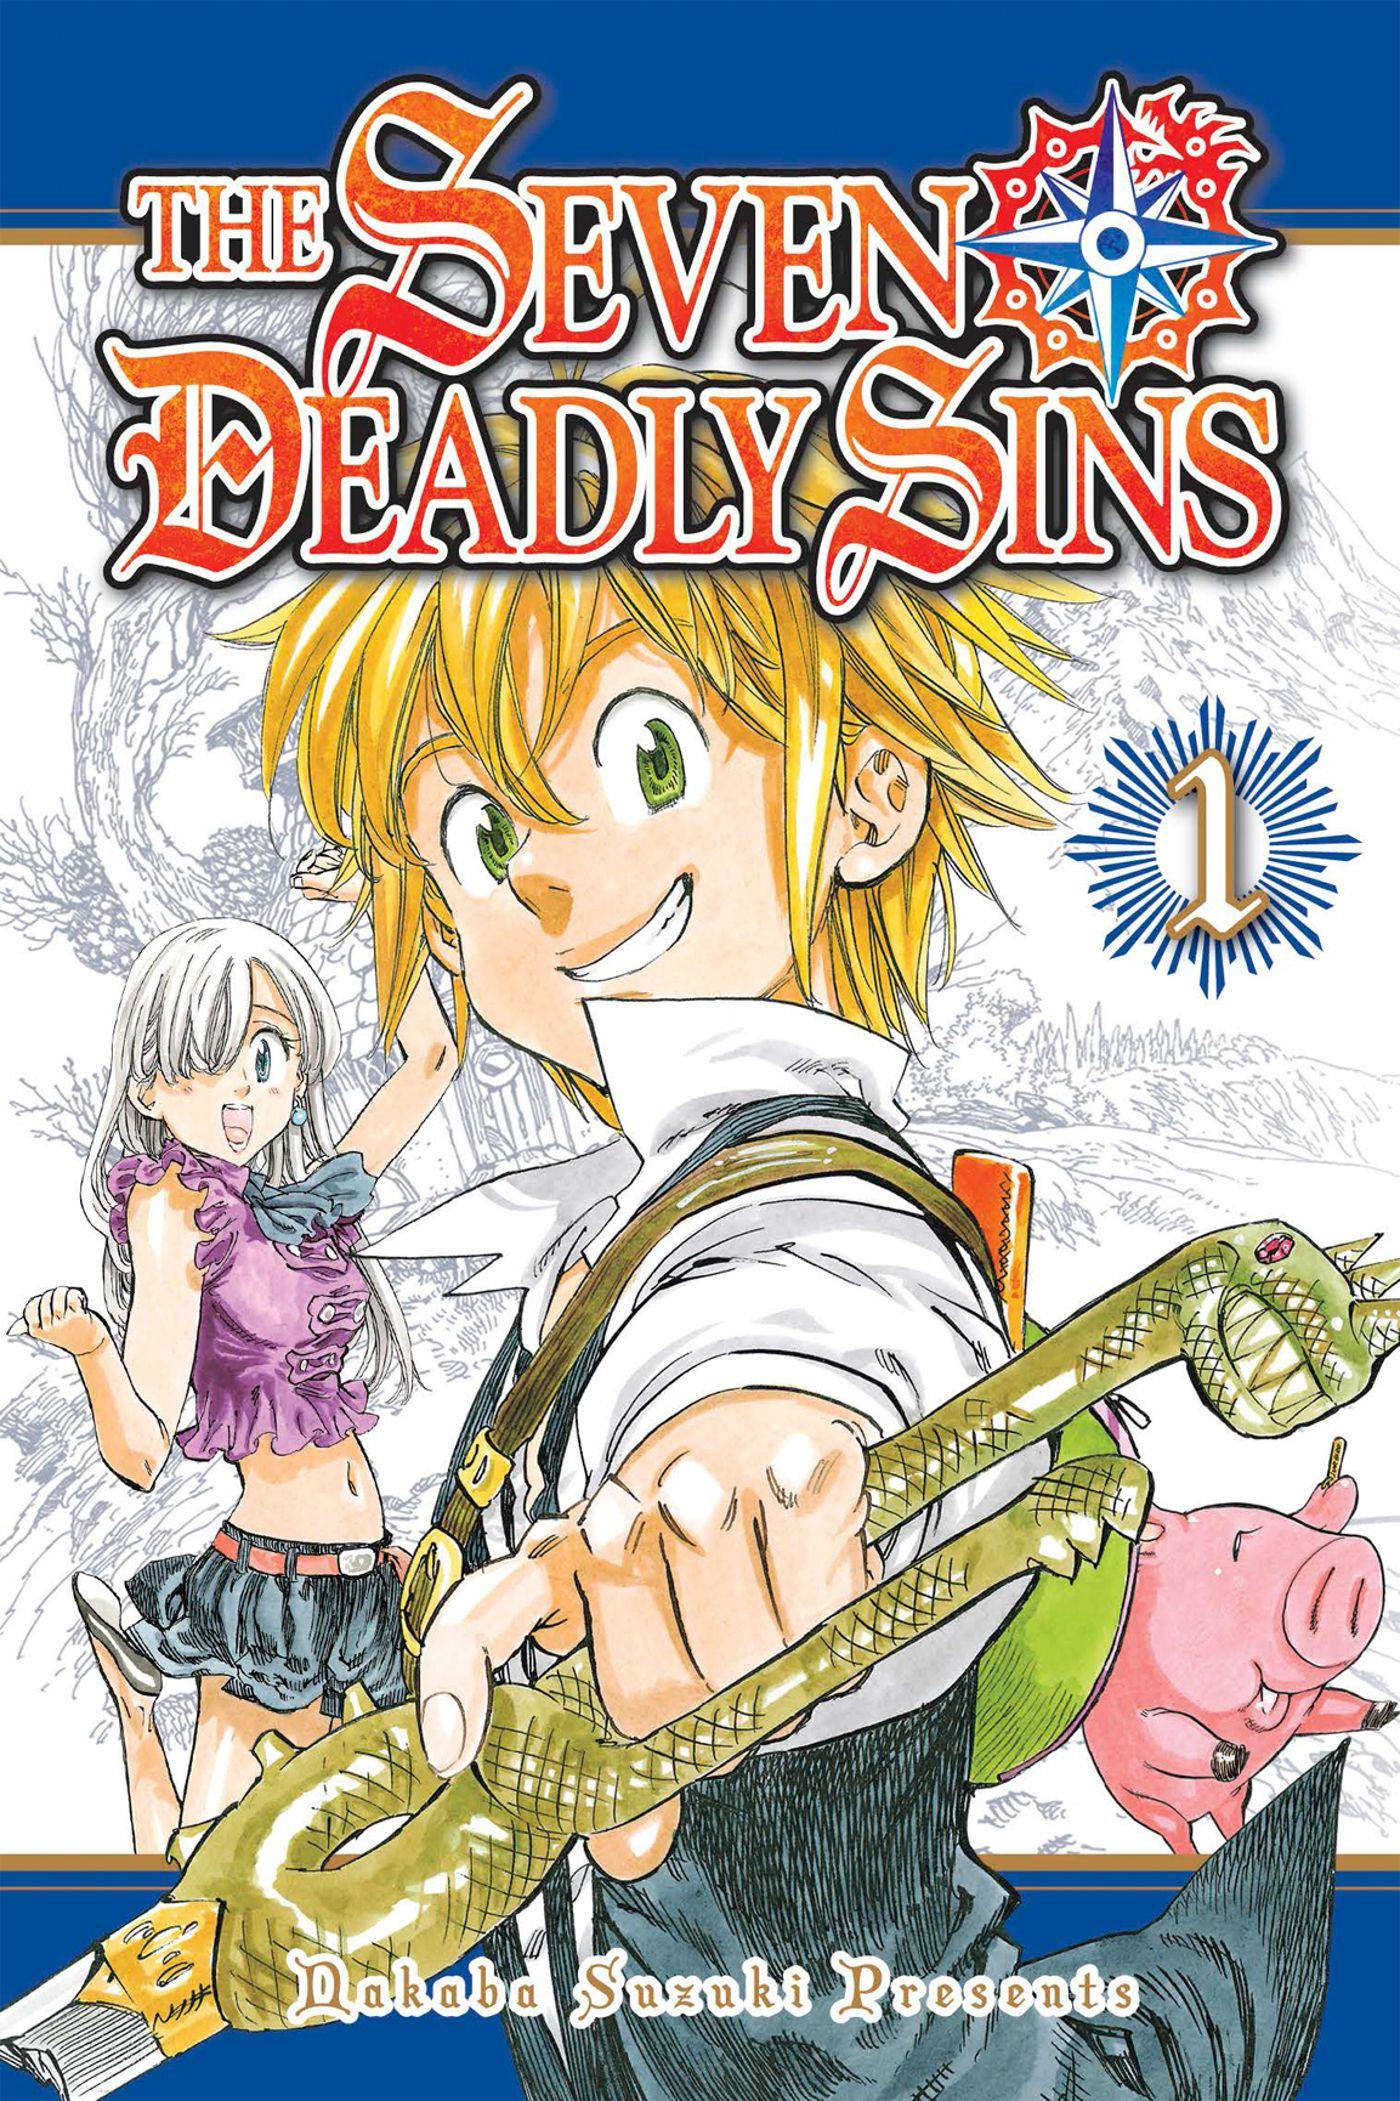 Cover of the Seven Deadly Sins of K MANGA